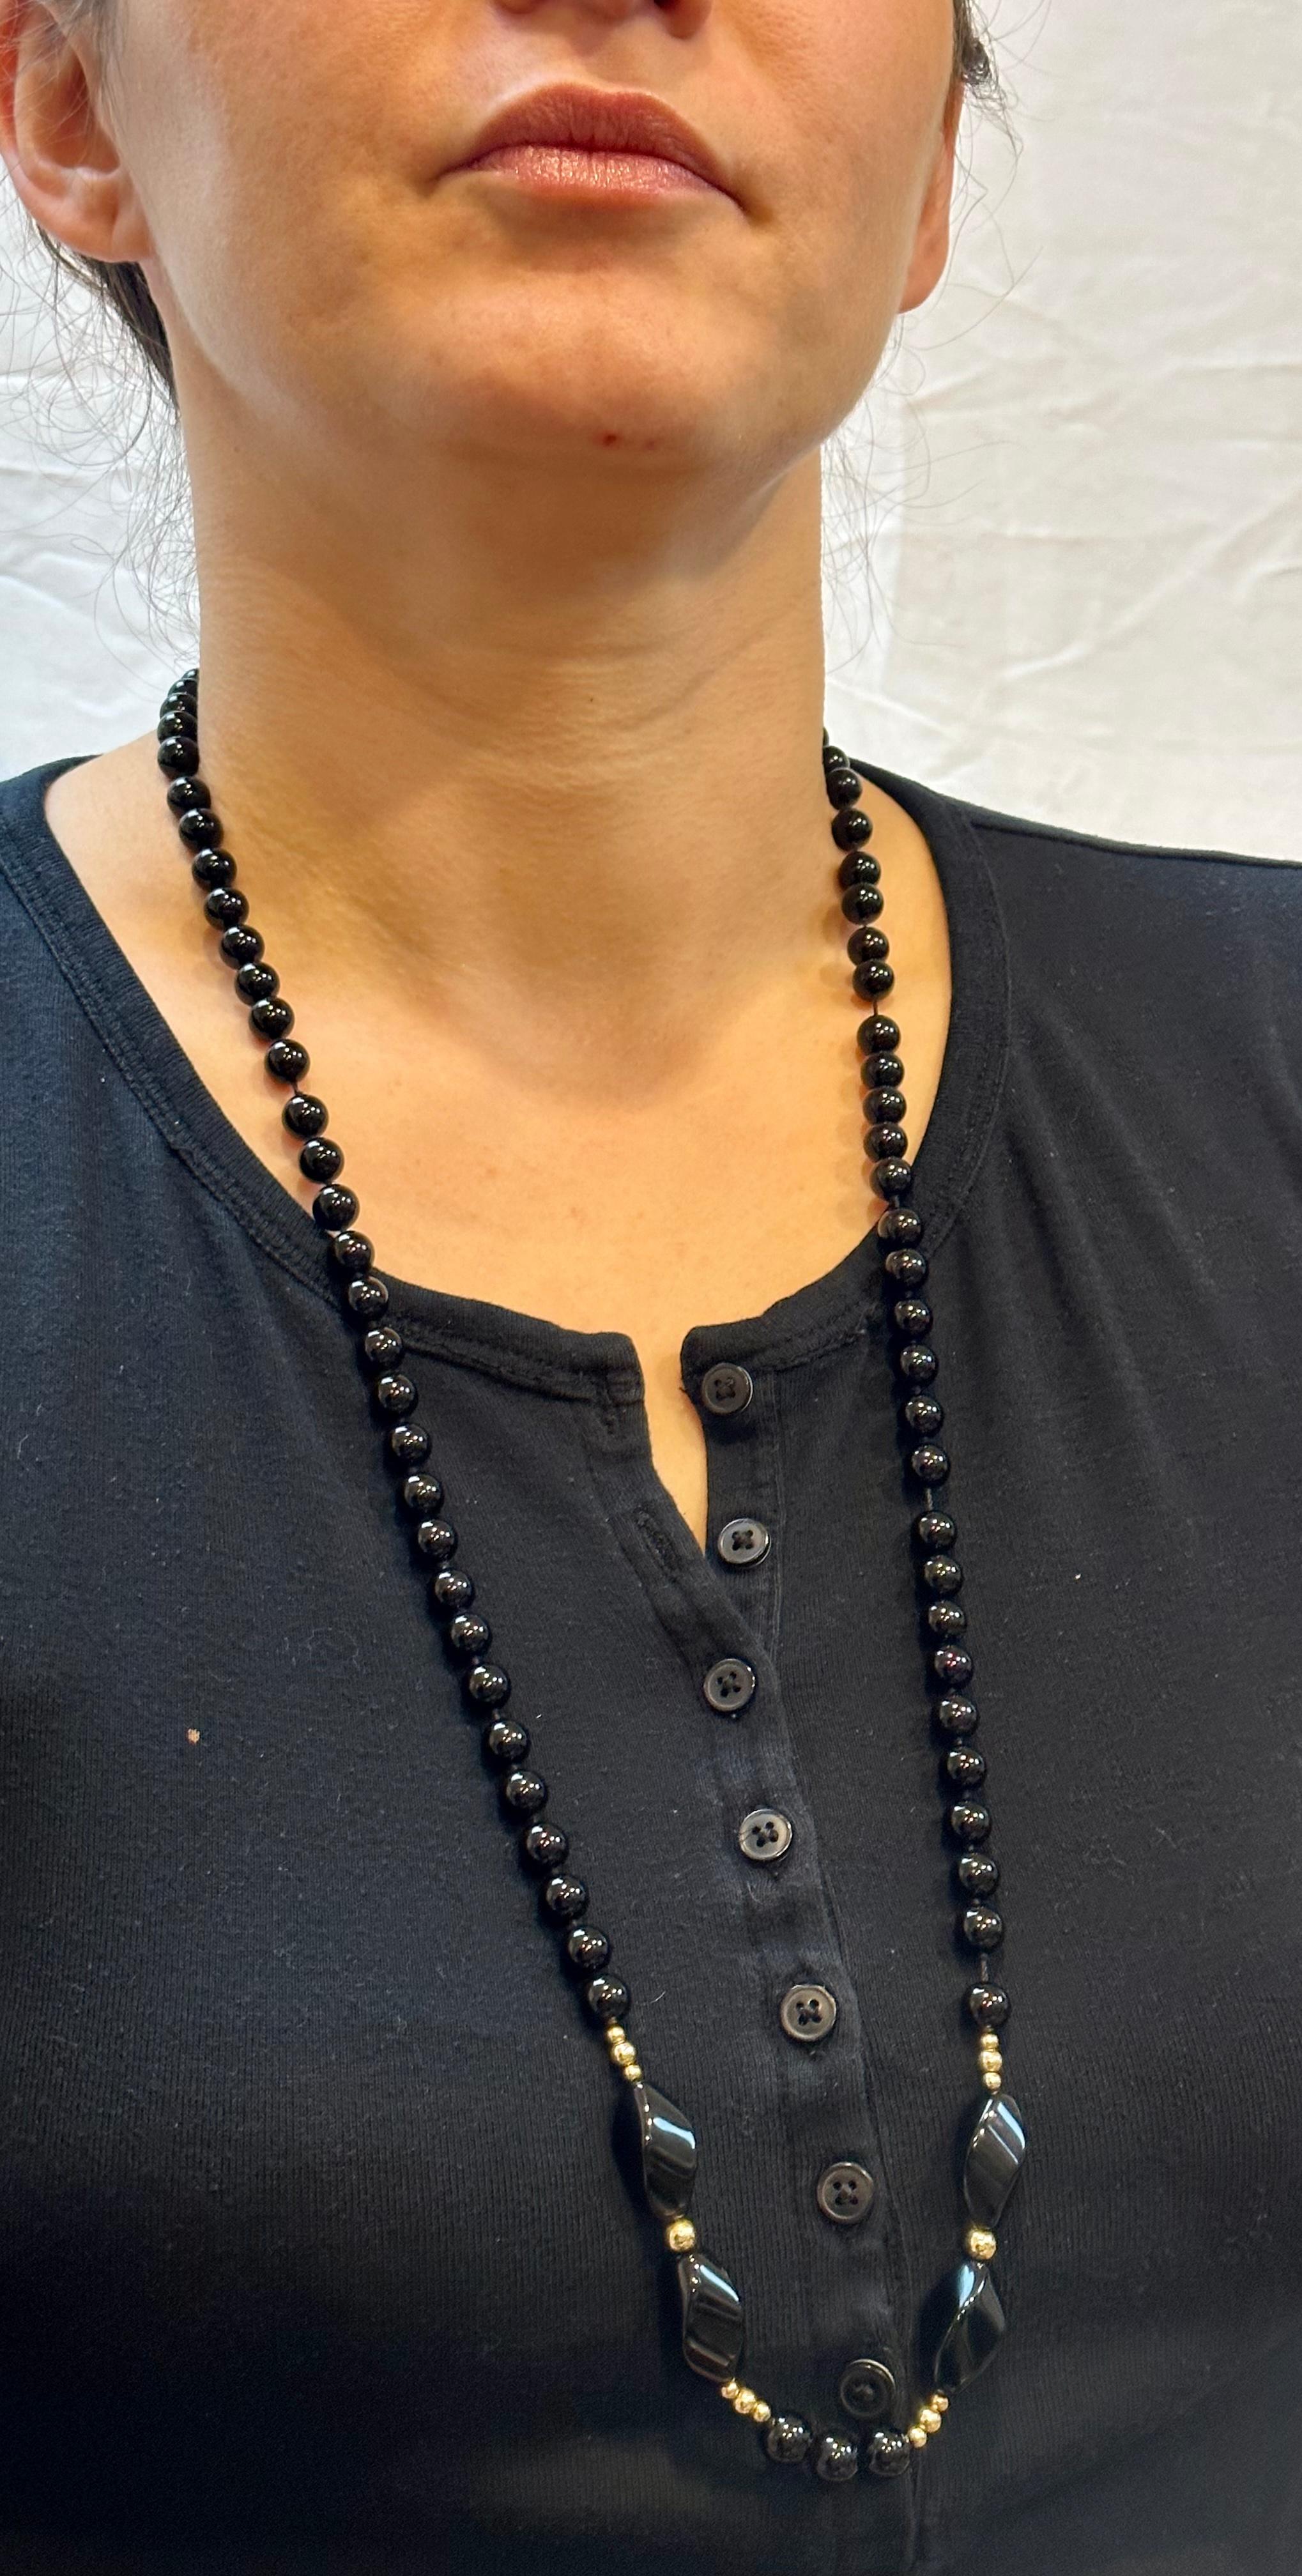 Round 8 MM Bead Black Onyx & 14 Karat Gold Bead Necklace 32 Inch Long For Sale 1